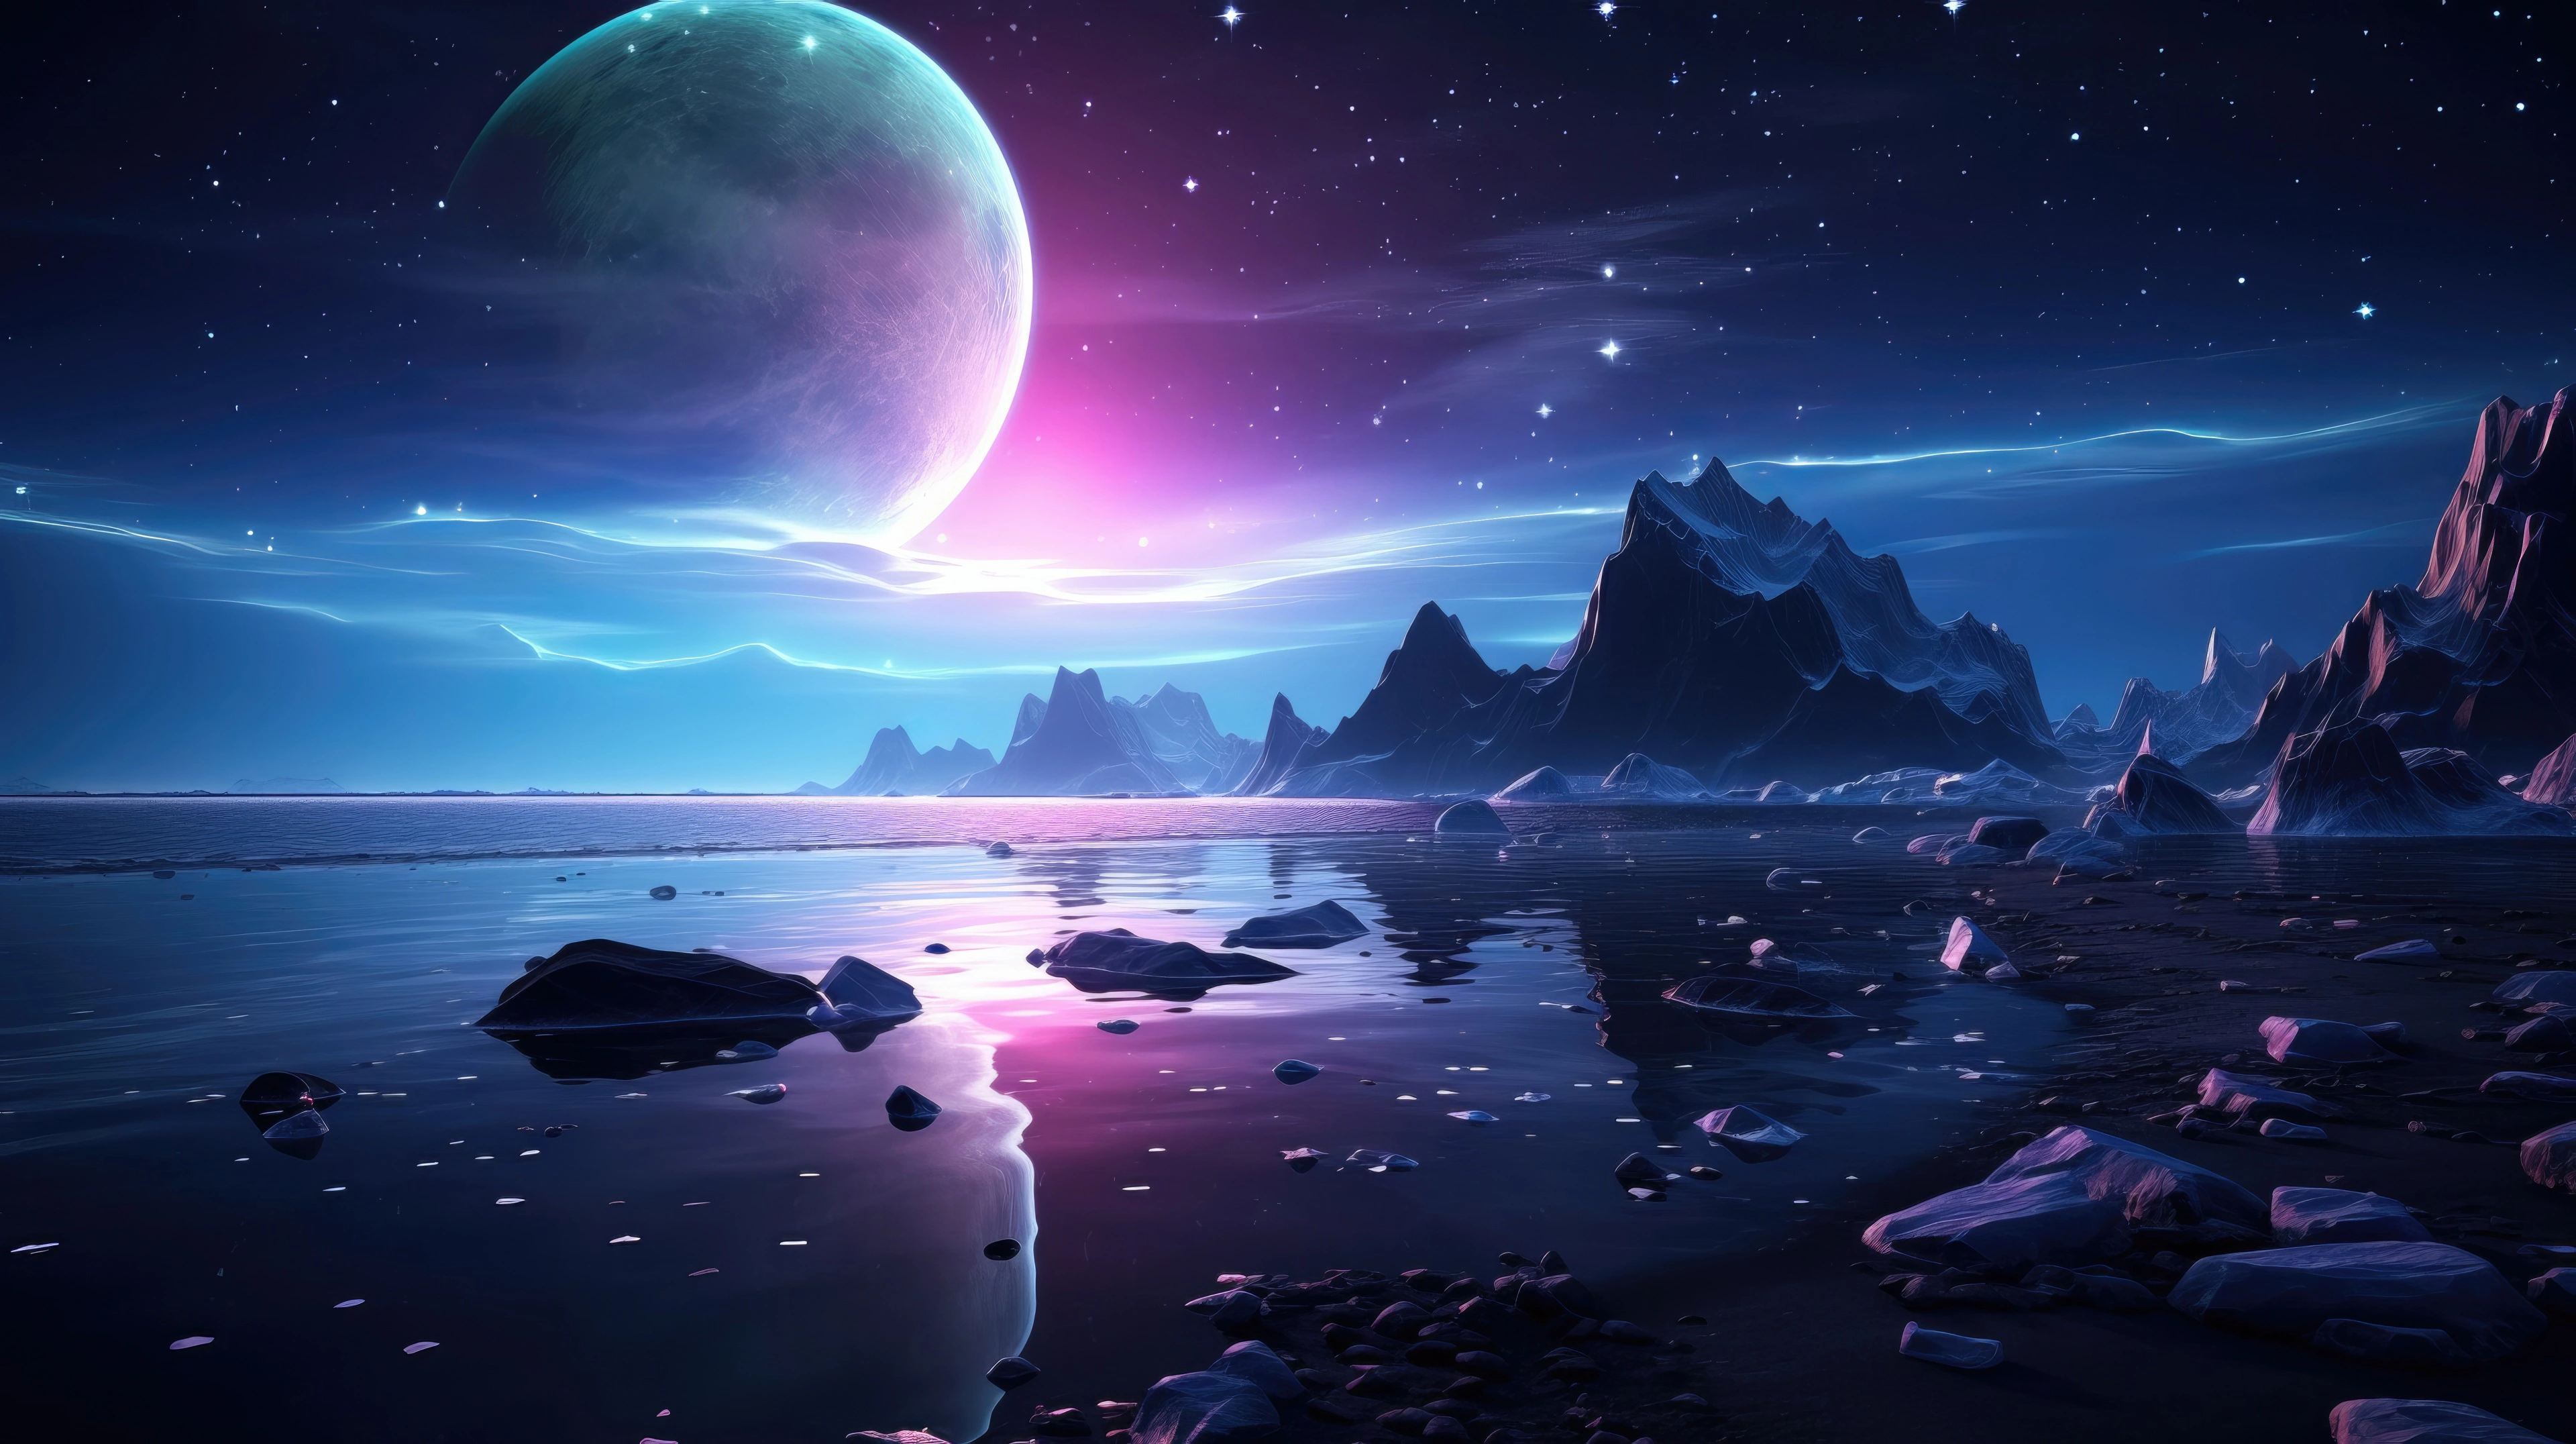 starry waters planet reflection amidst sky and rocks 0z.jpg